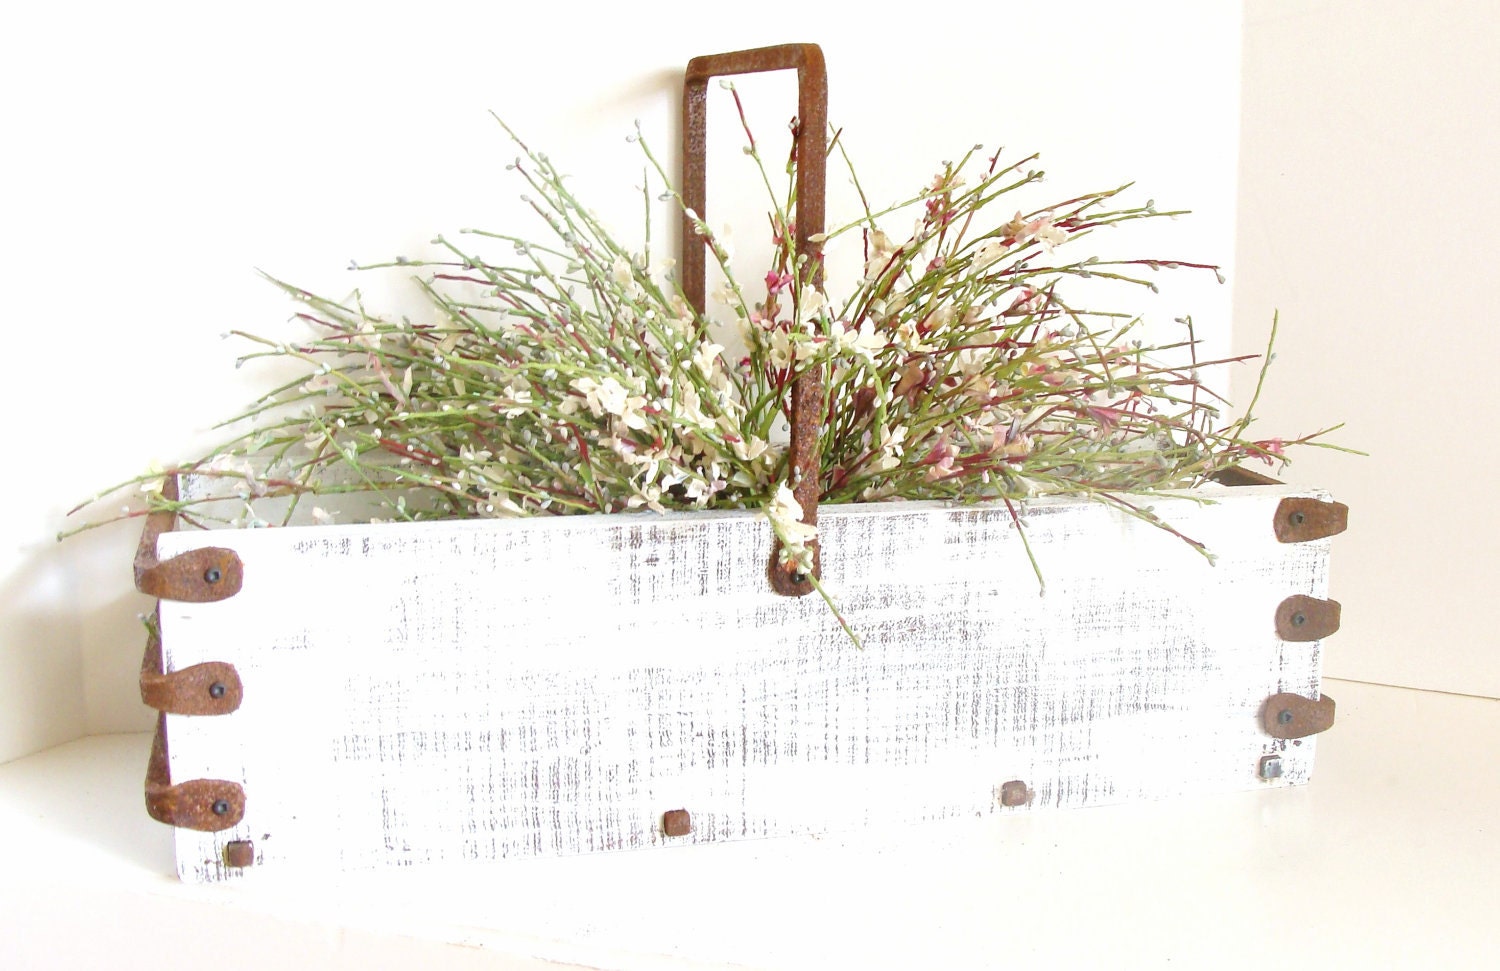 Caddy. Tray. Industrial. Cottage. Weddings. Rustic. White. Iron Handles